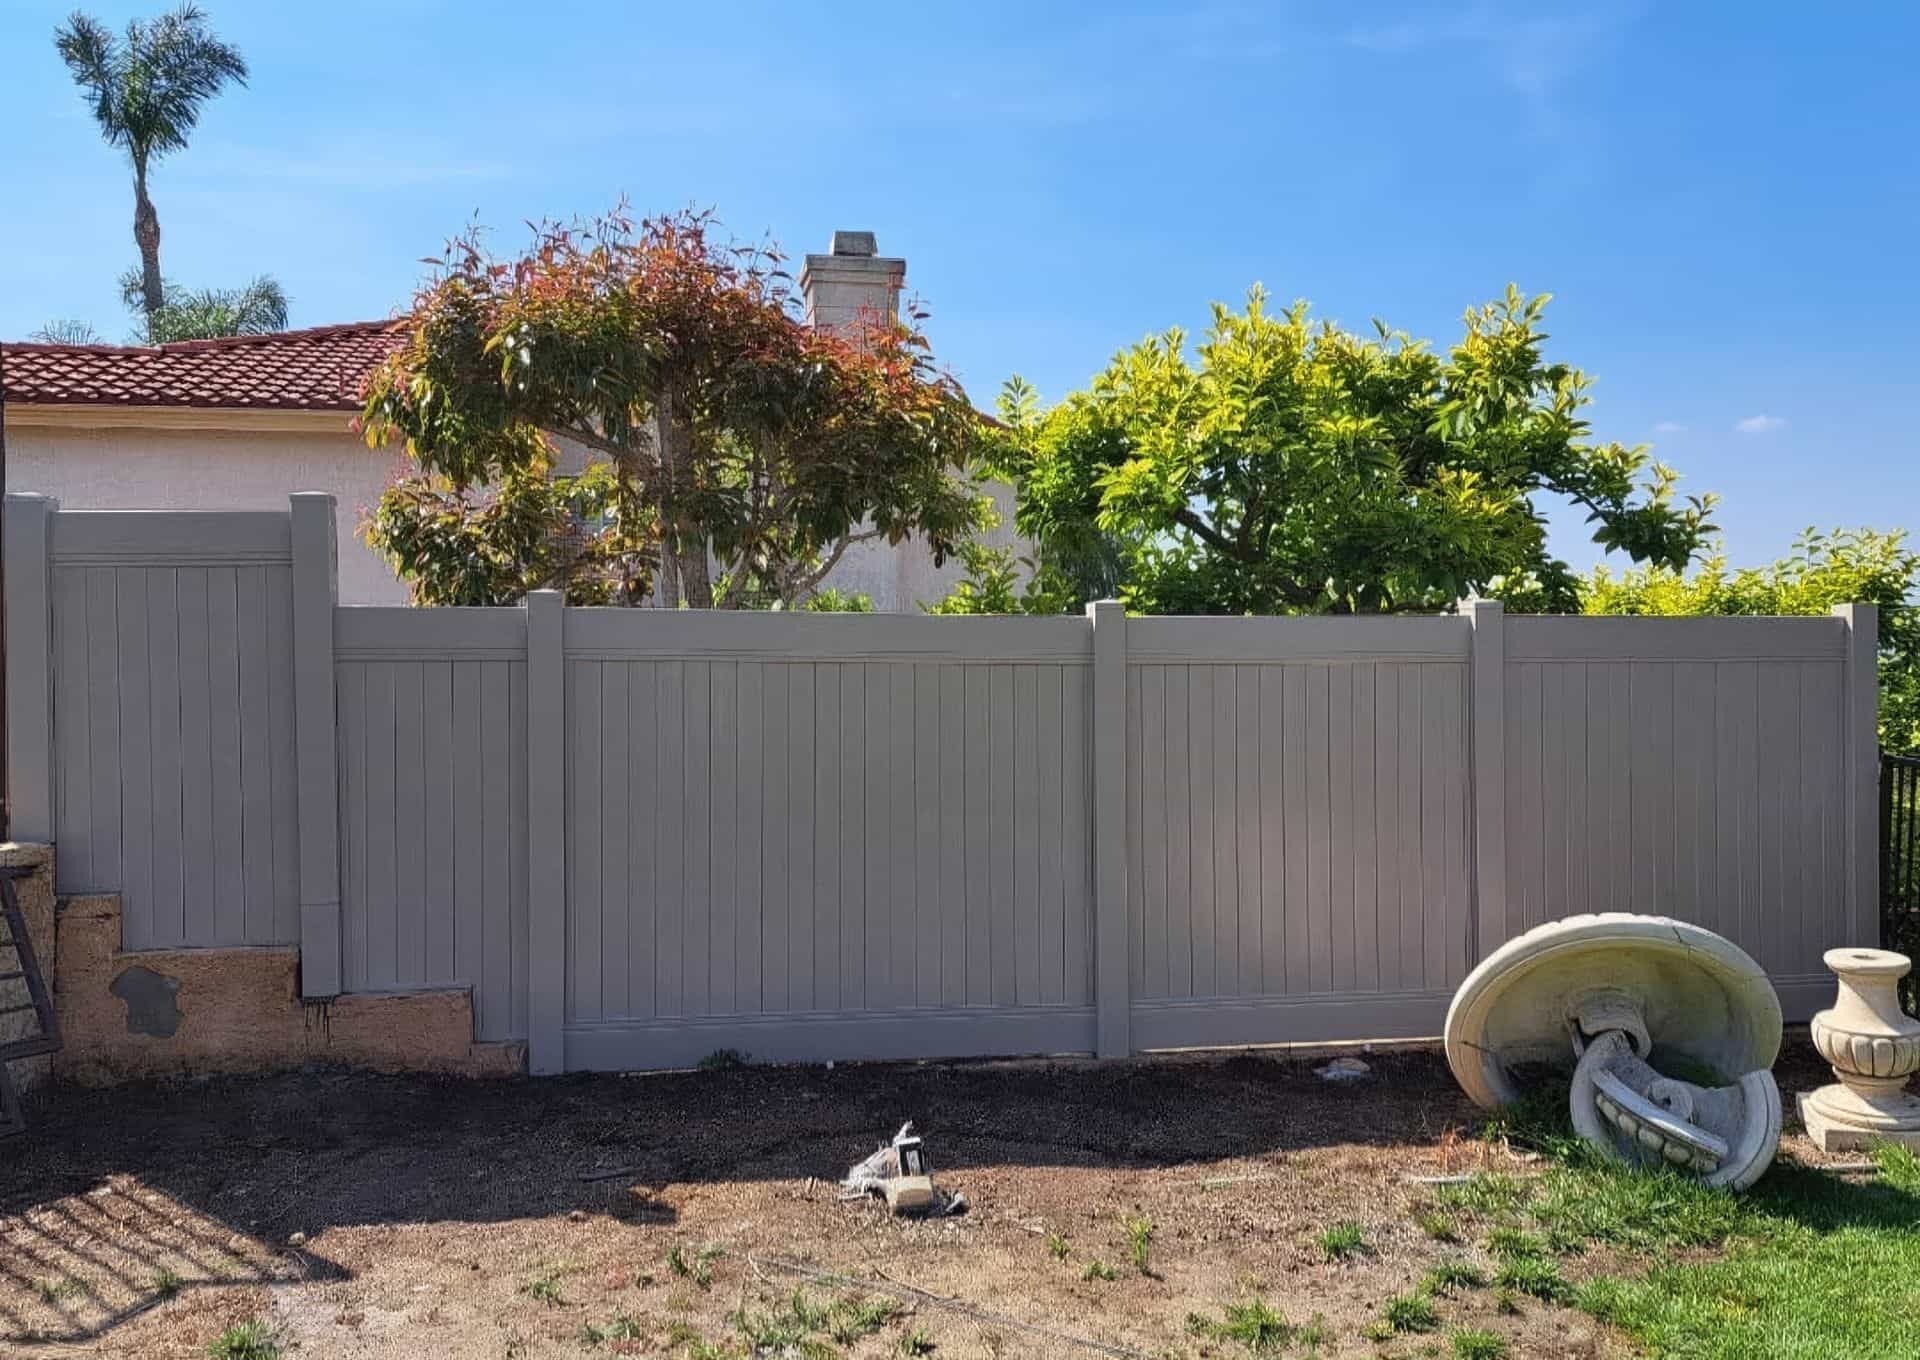 Vinyl clay colored fence with trees in the back and patchy green lawn in front with broken decorations